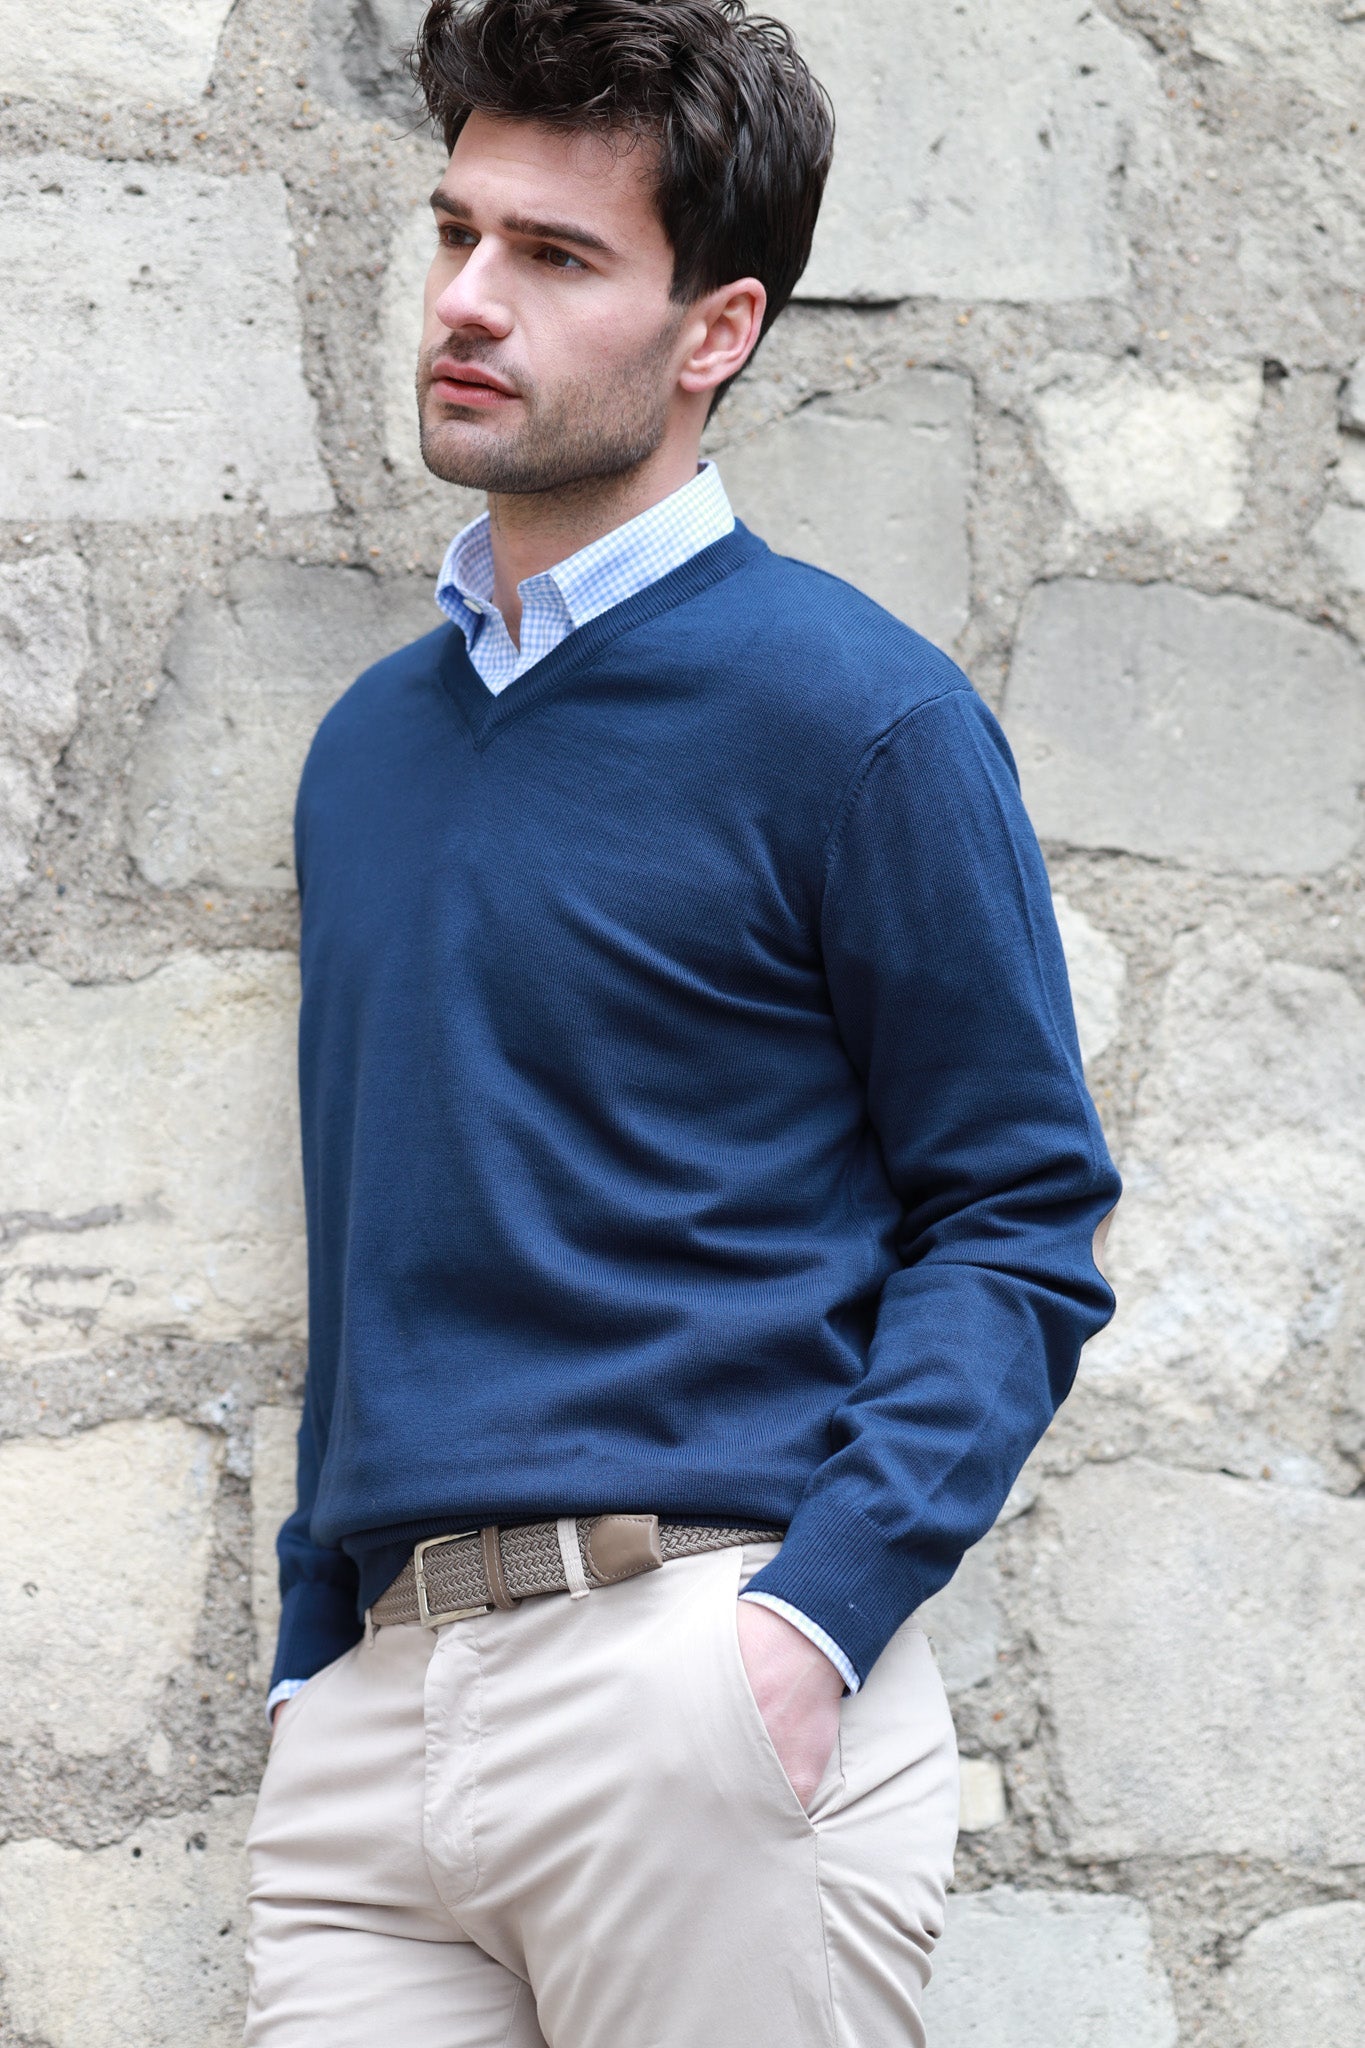 Pull coton Homme